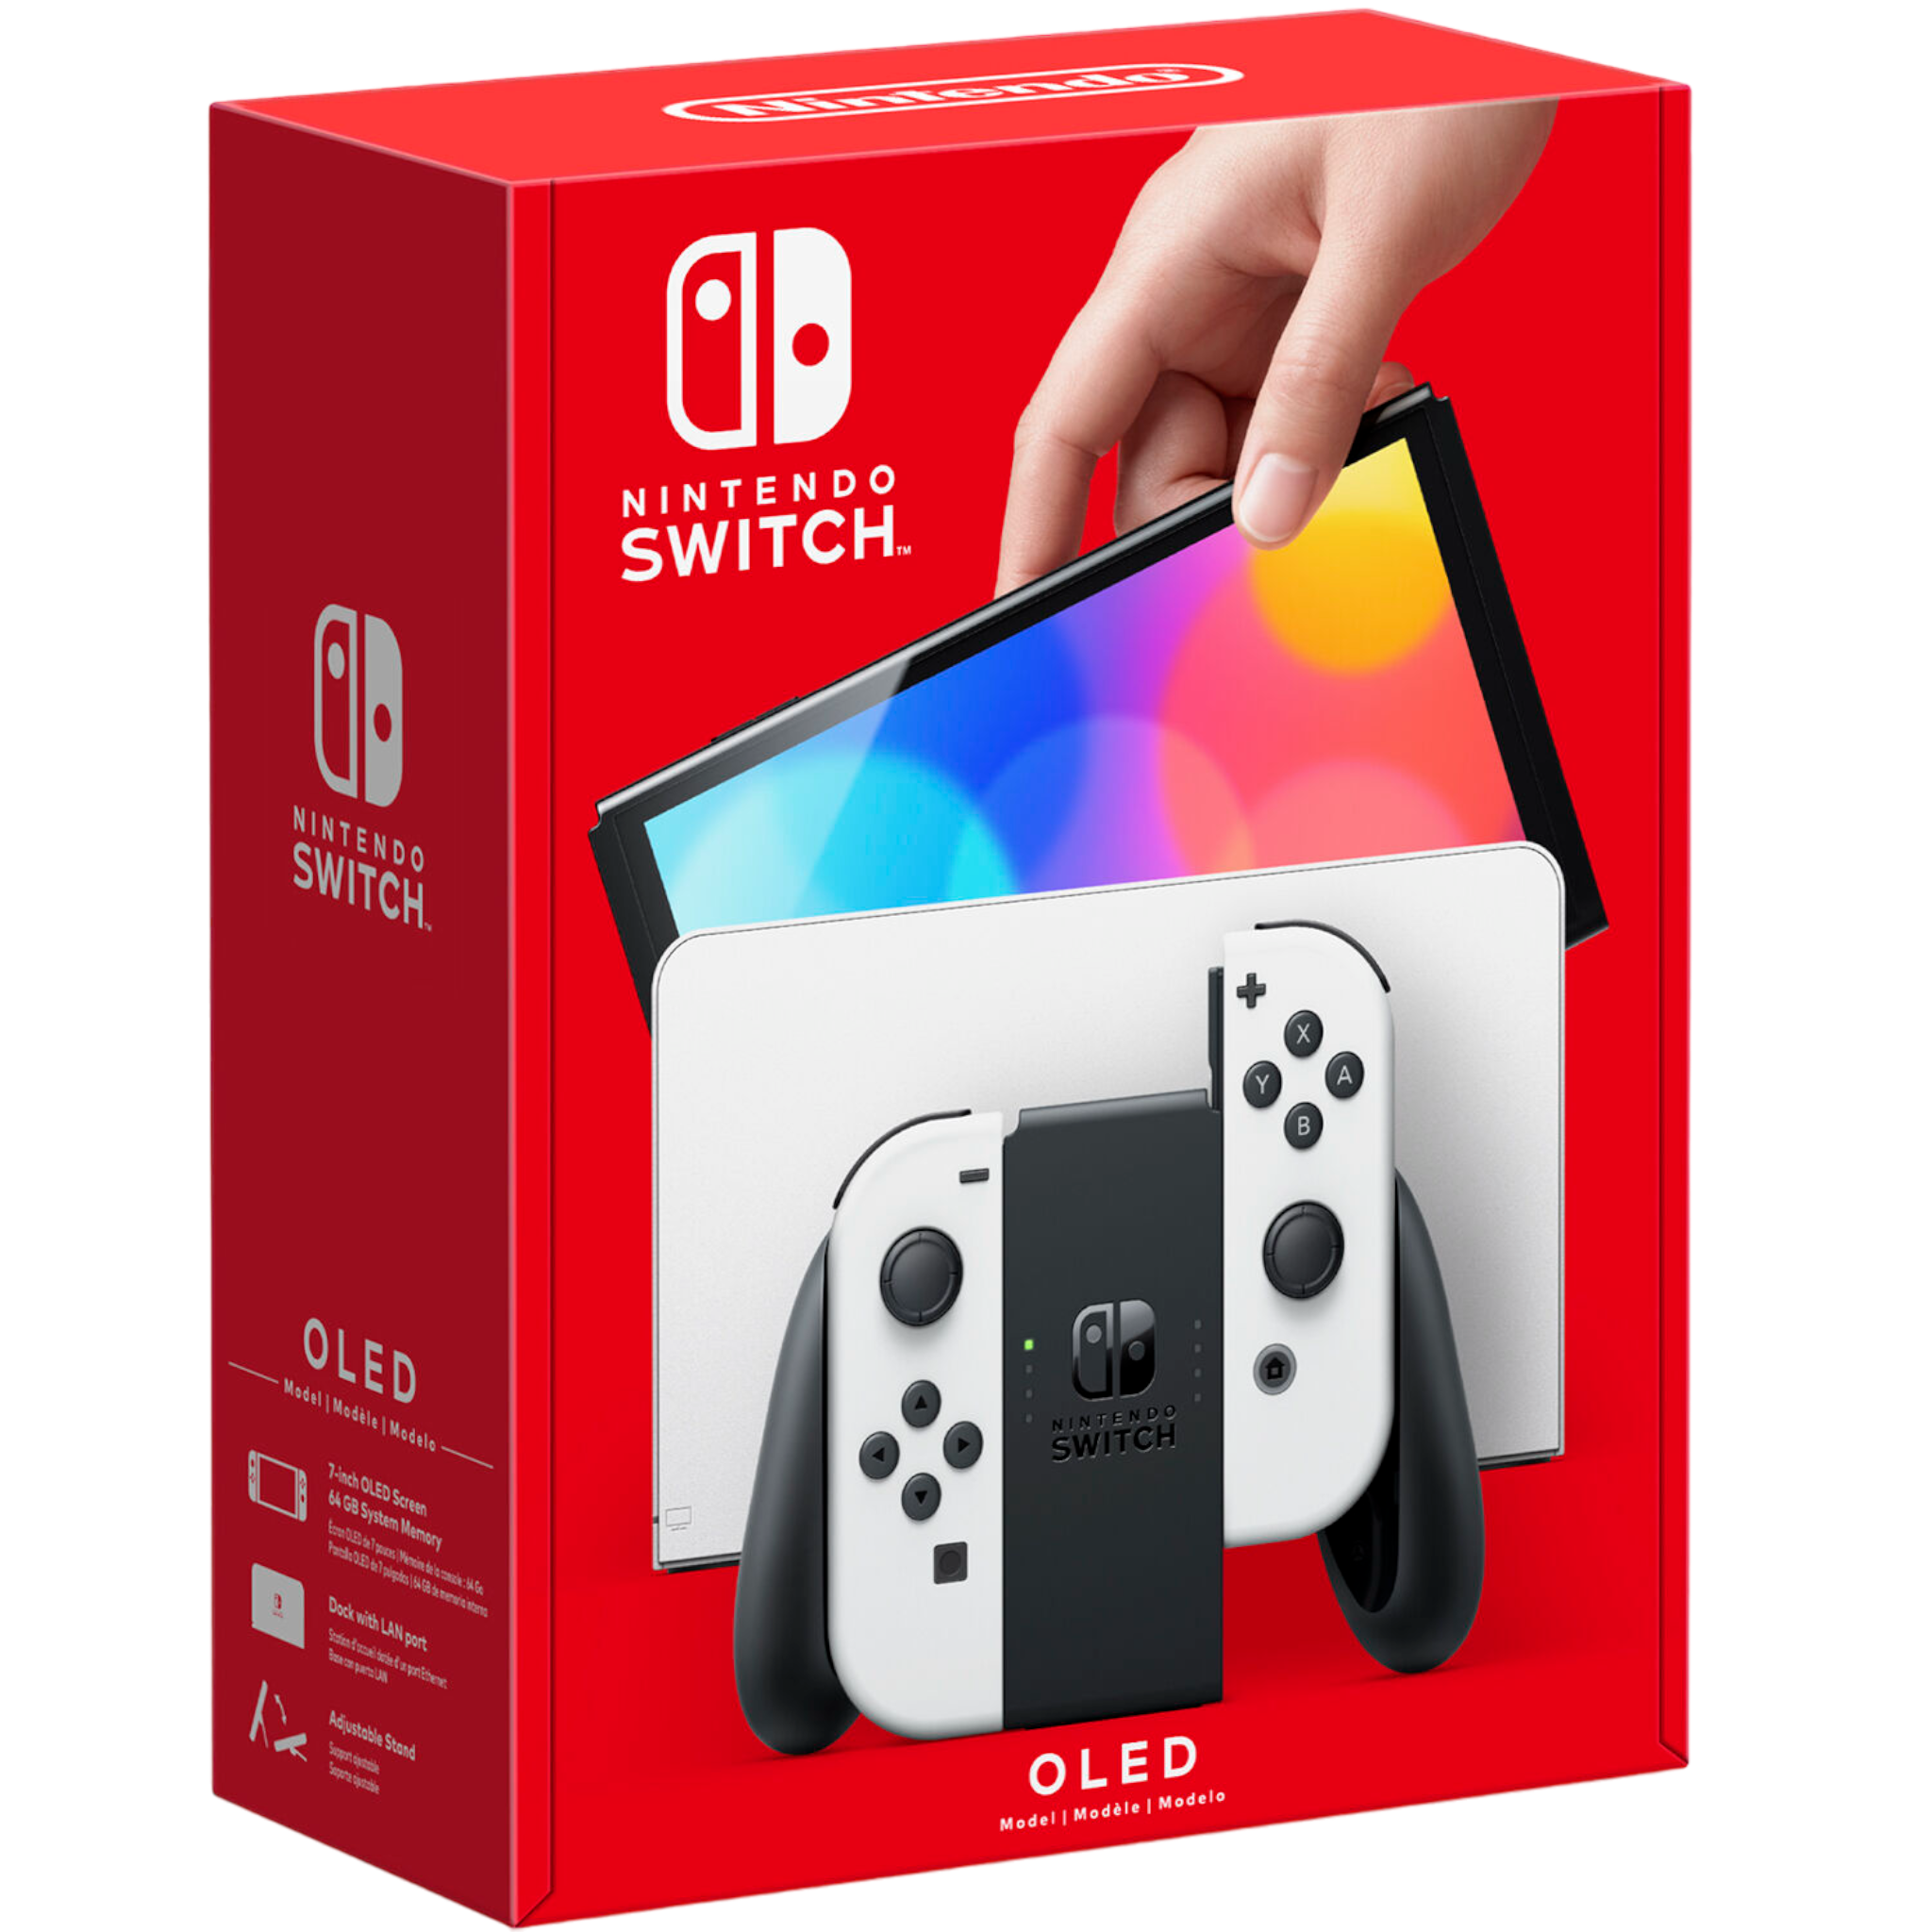 Nintendo Switch 64GB OLED Console White Joy-Con Bundle with Splatoon 3 and PRO-DISTRIBUTING Cleaning Cloth - Pro-Distributing